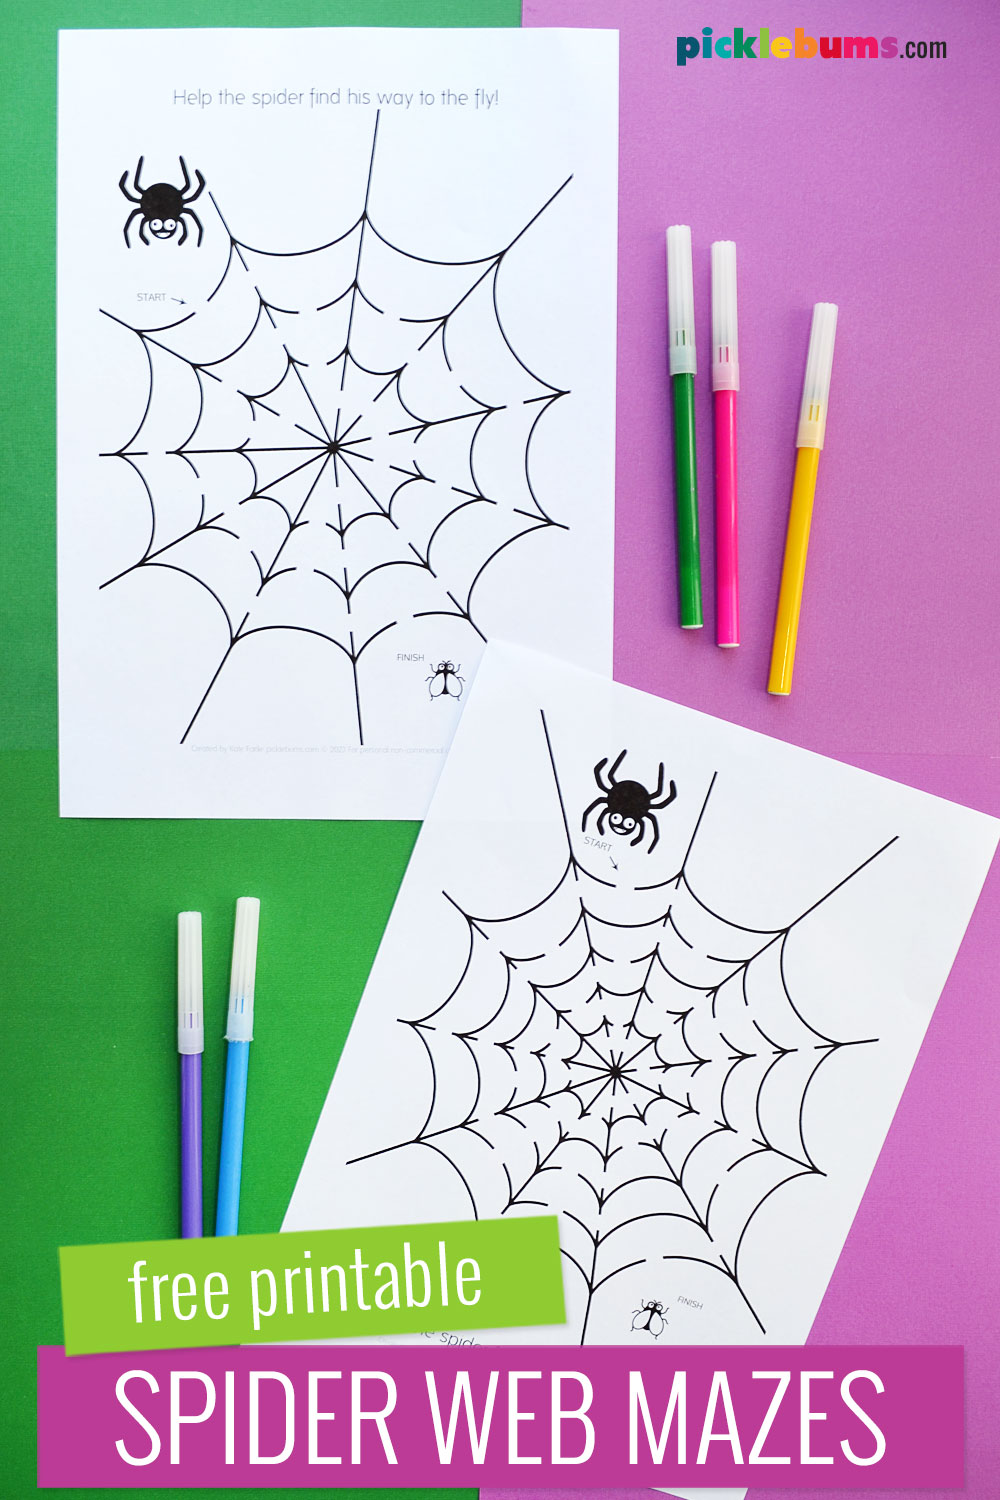 spider web mazes on purple and green background